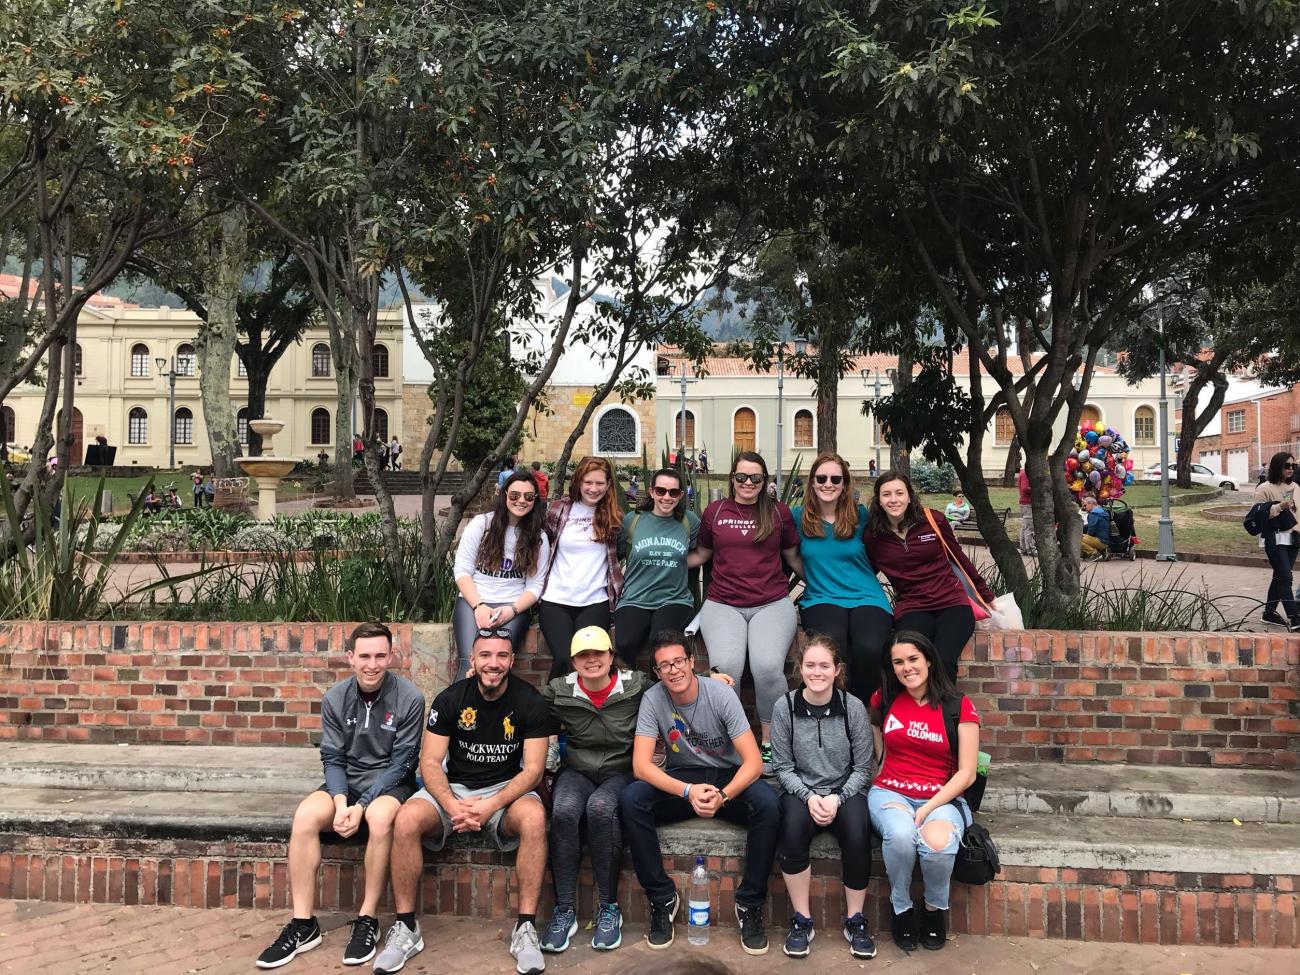 New to this year's trips, a group of participants focused on youth engagement will work at the YMCA in Colombia, South America.